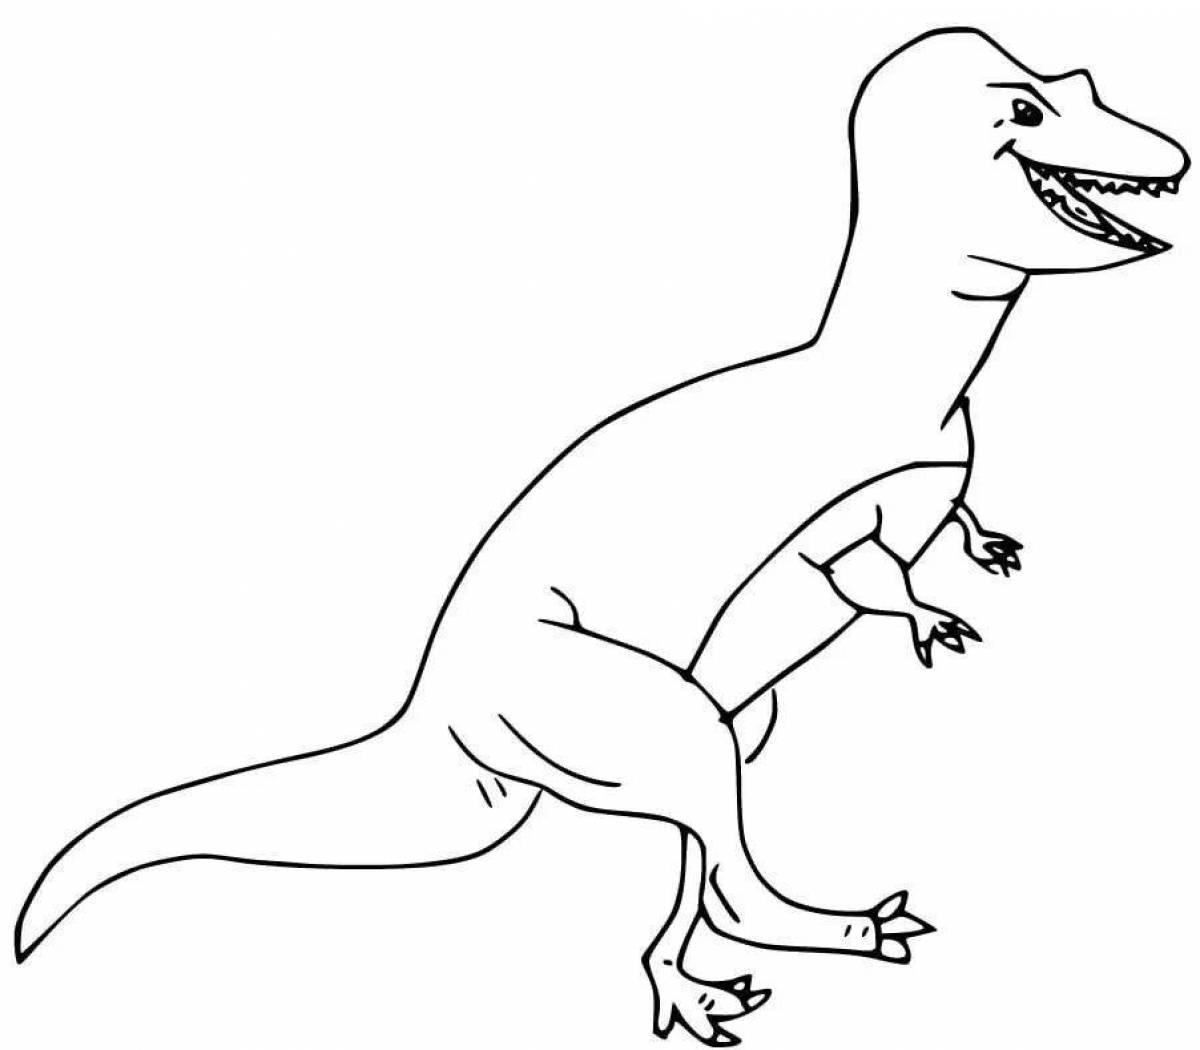 Colorfully designed allosaurus coloring page